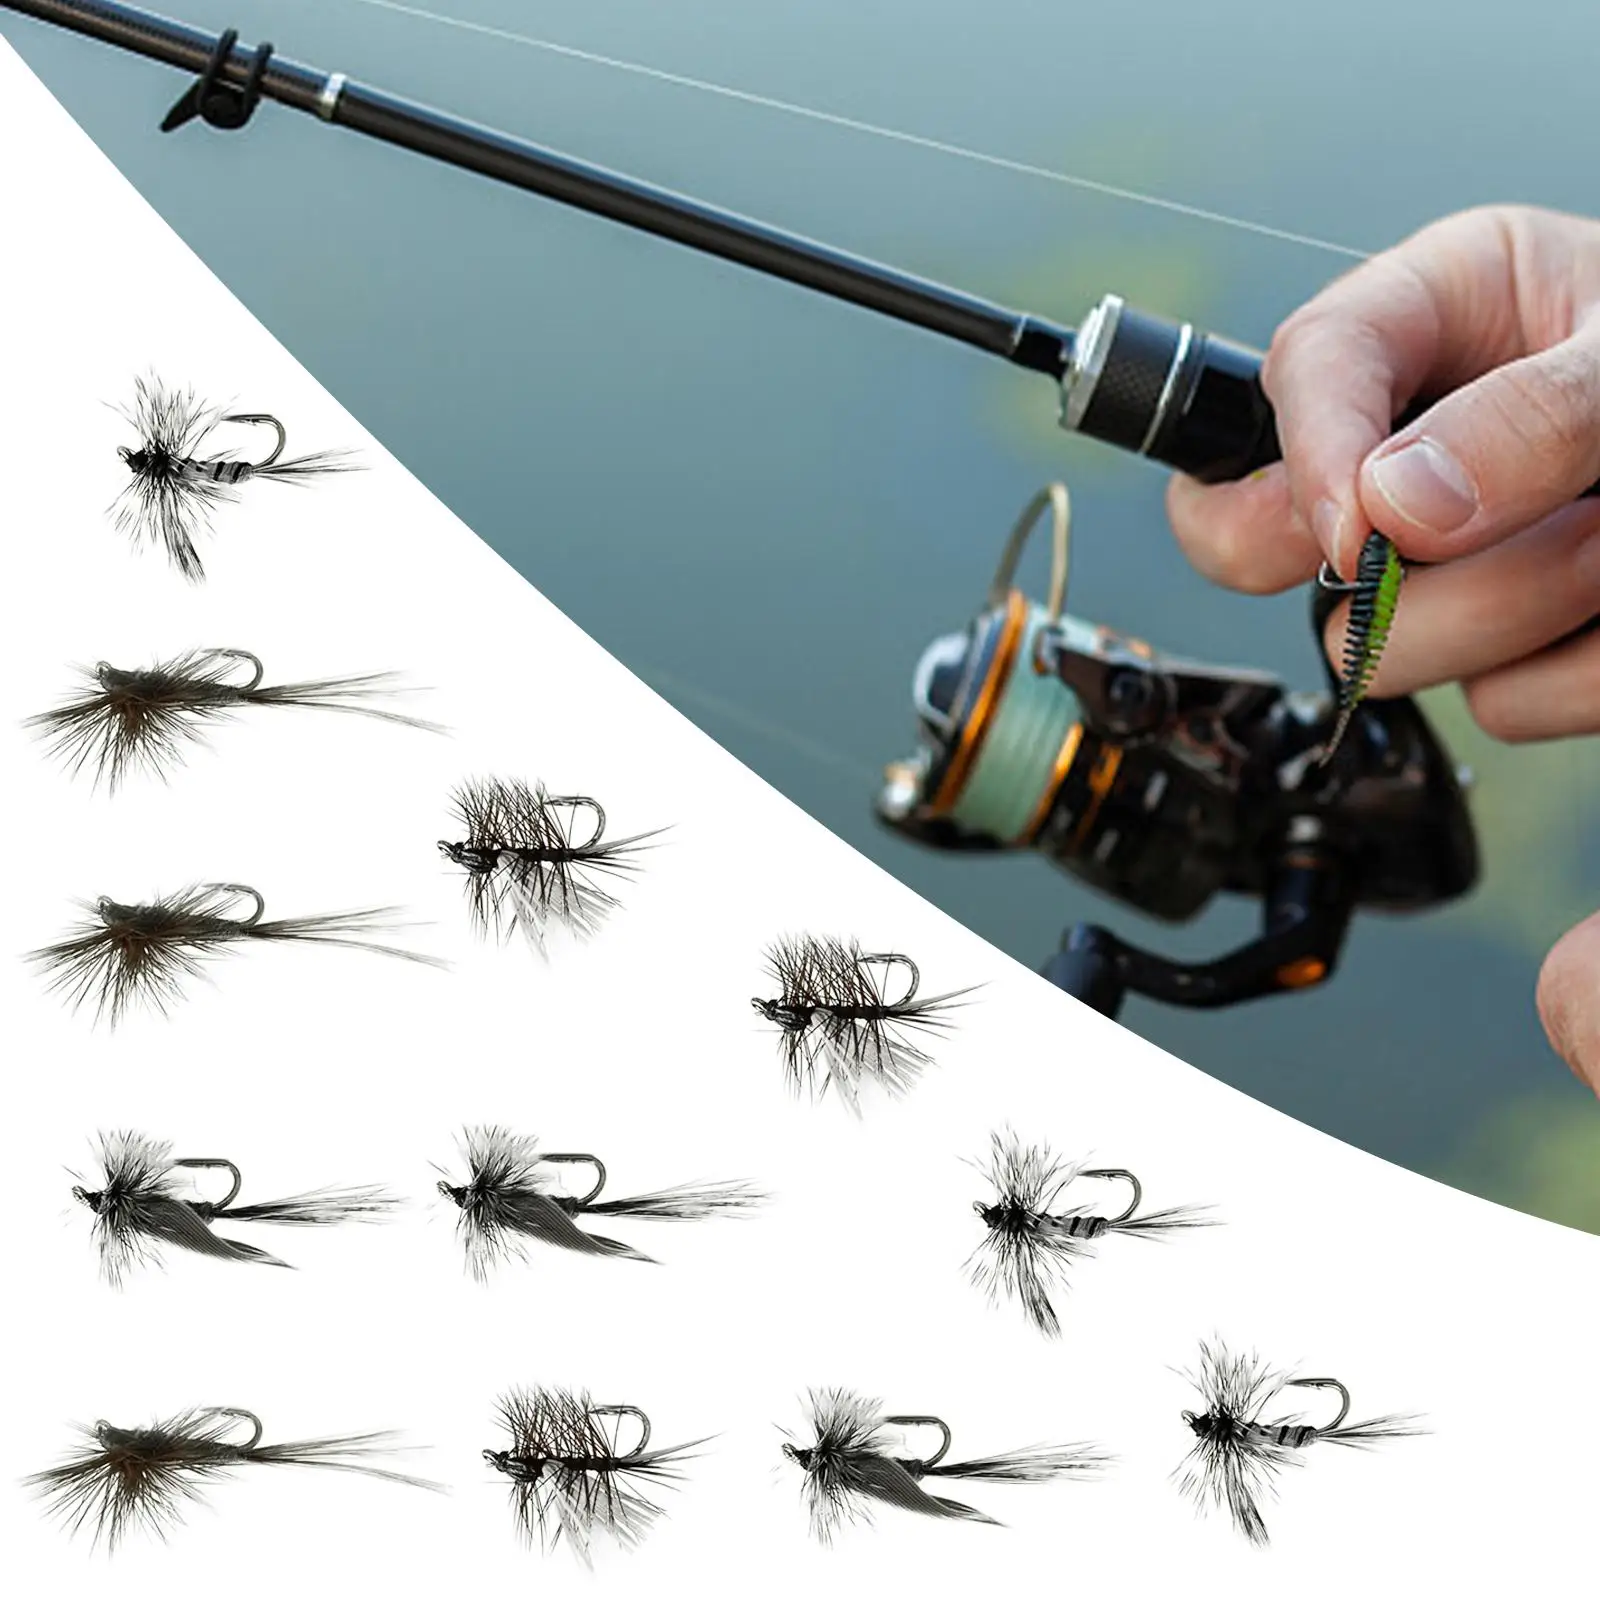 12x Fly Fishing Flies Fly Fishing Lures Kit Sea Fishing Fishing Gear Outdoor Fishing Bait with Hooks for Perch Bass Trout Salmon